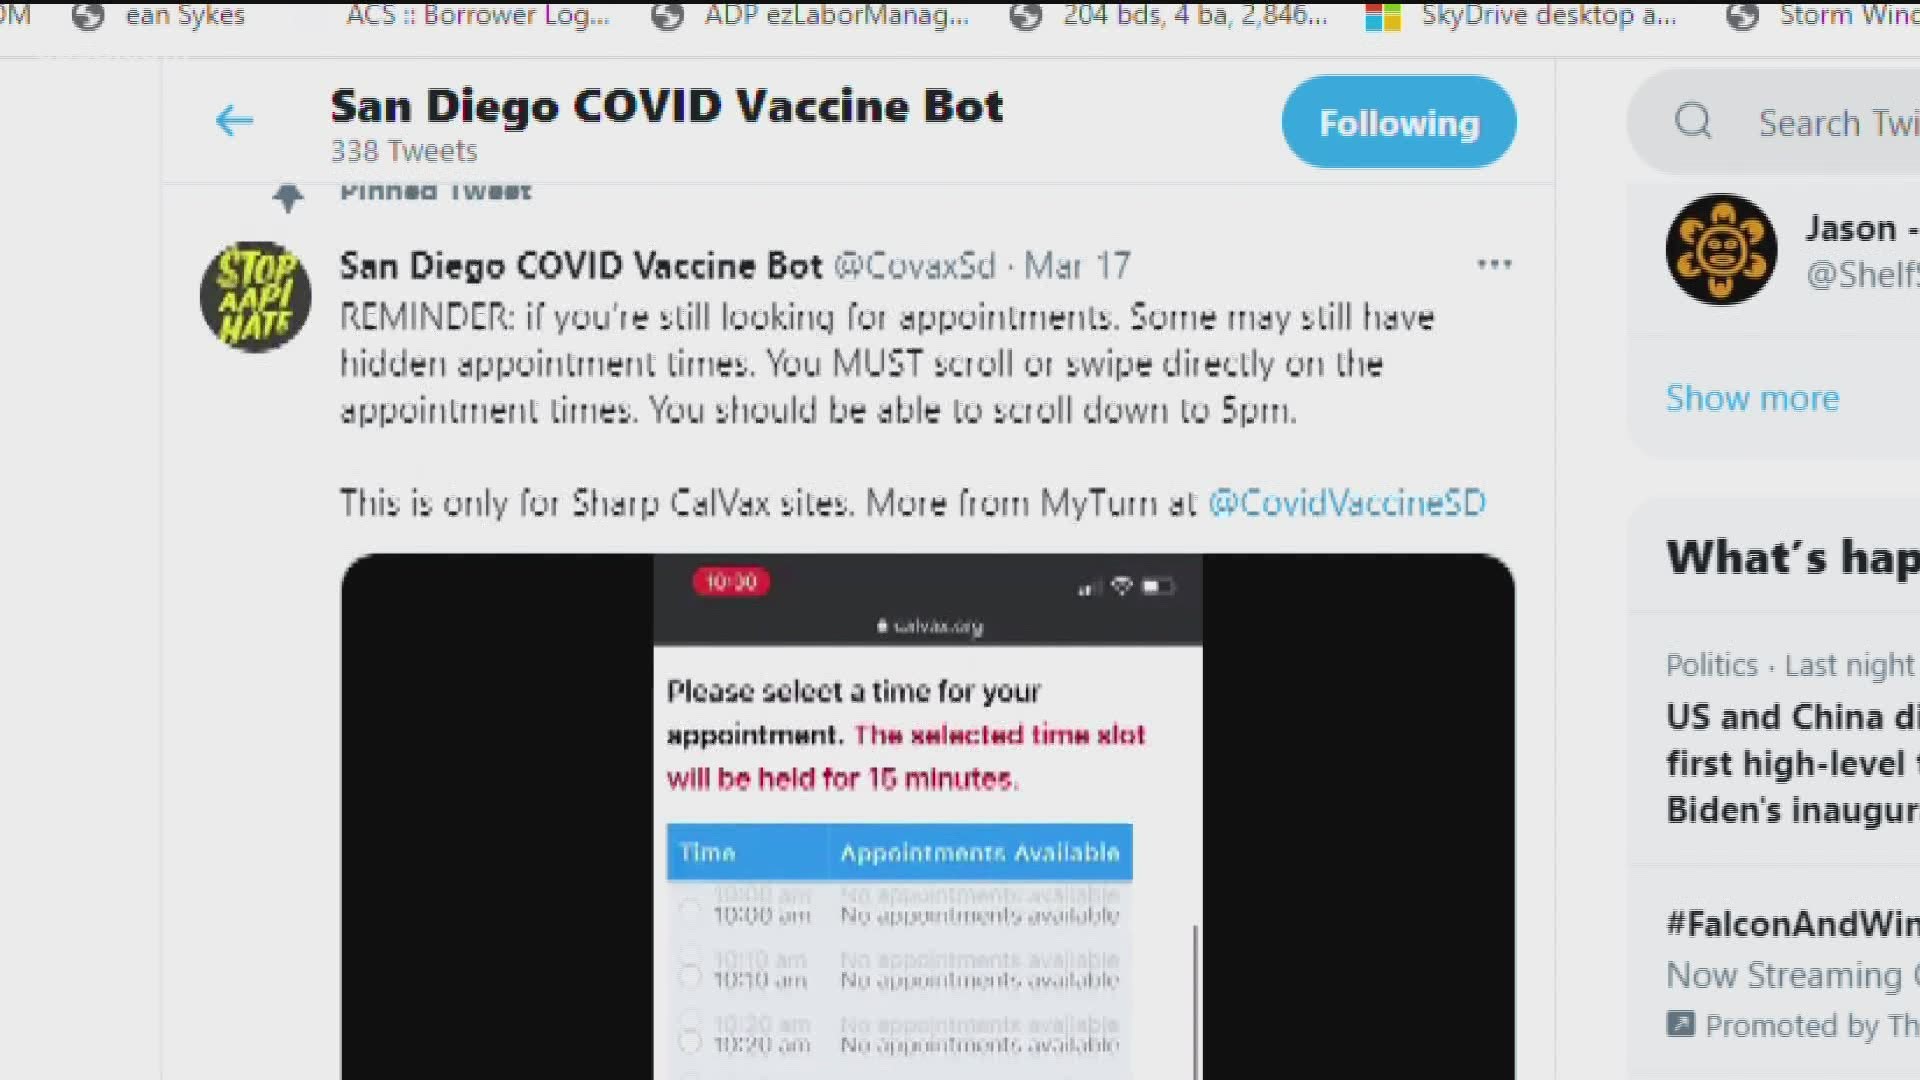 The "CovaxSD" bot is free and available to anyone on Twitter, helping find and alert subscribers to open vaccine appointments in the San Diego area.